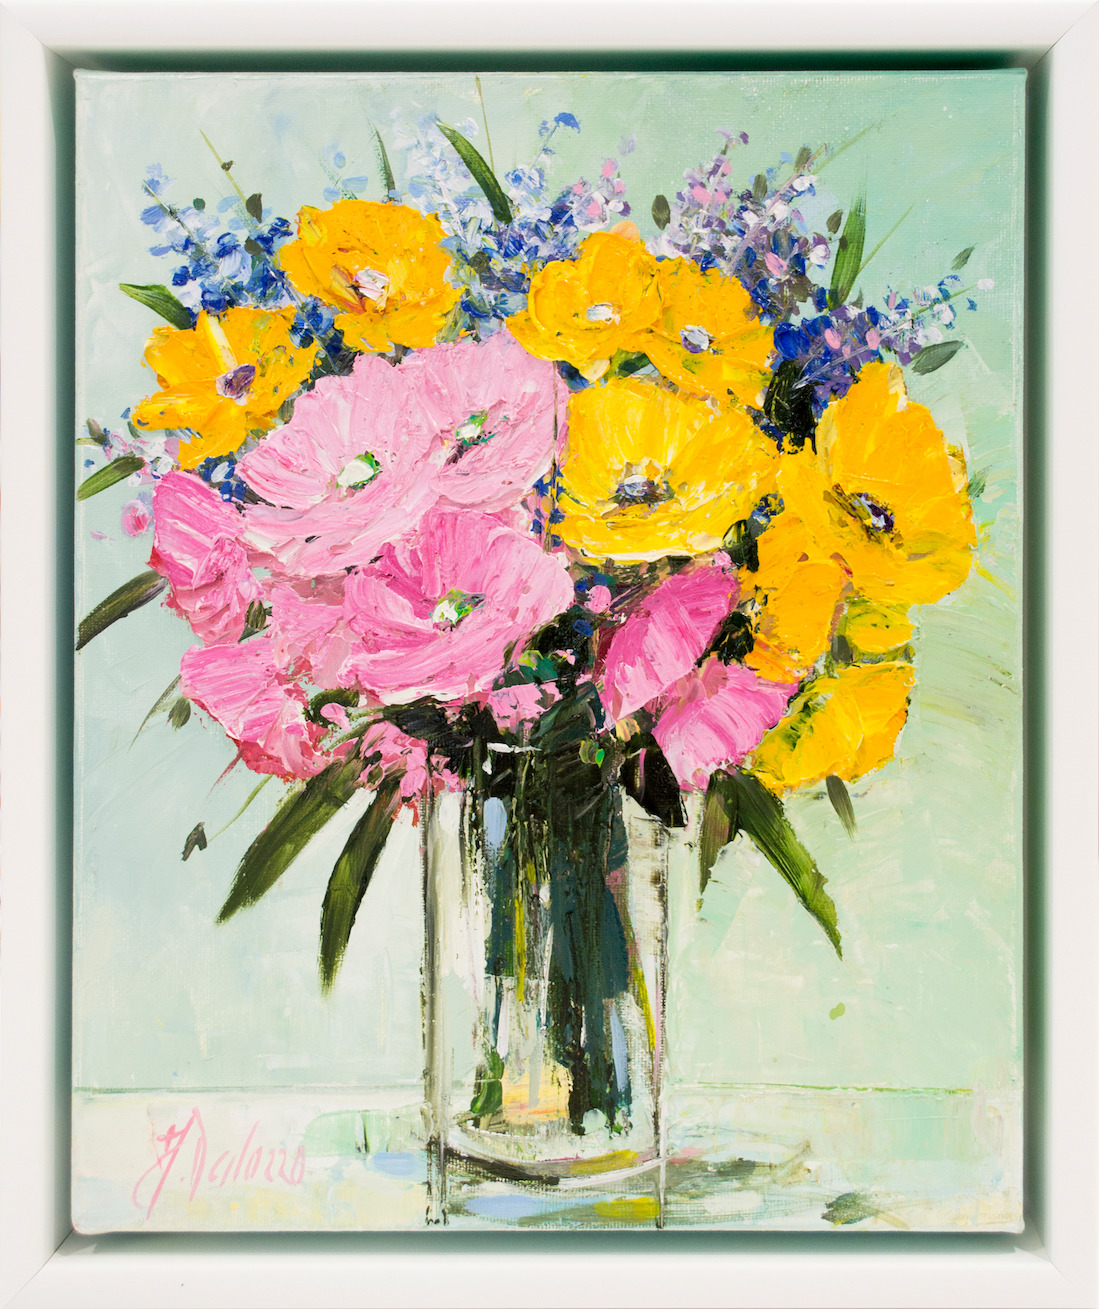 Framed Front View Of Still Life Painting "Splash of Blossom" By Judith Dalozzo